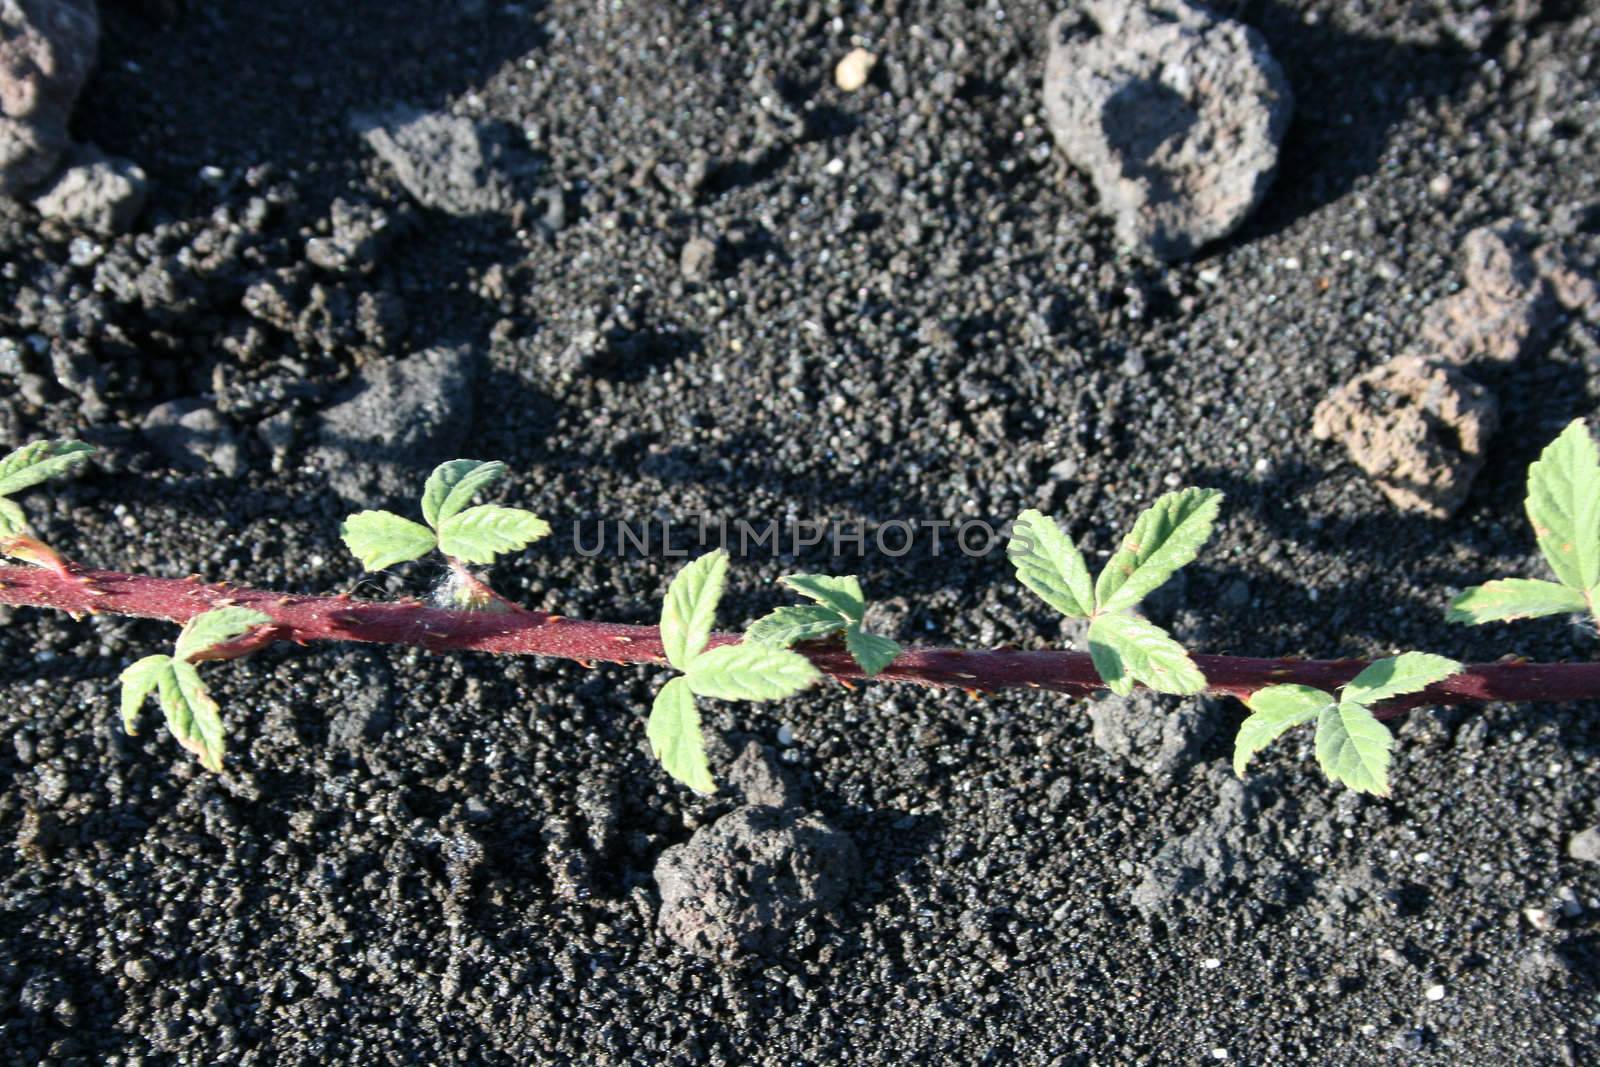 Life growing on Etna's Lava